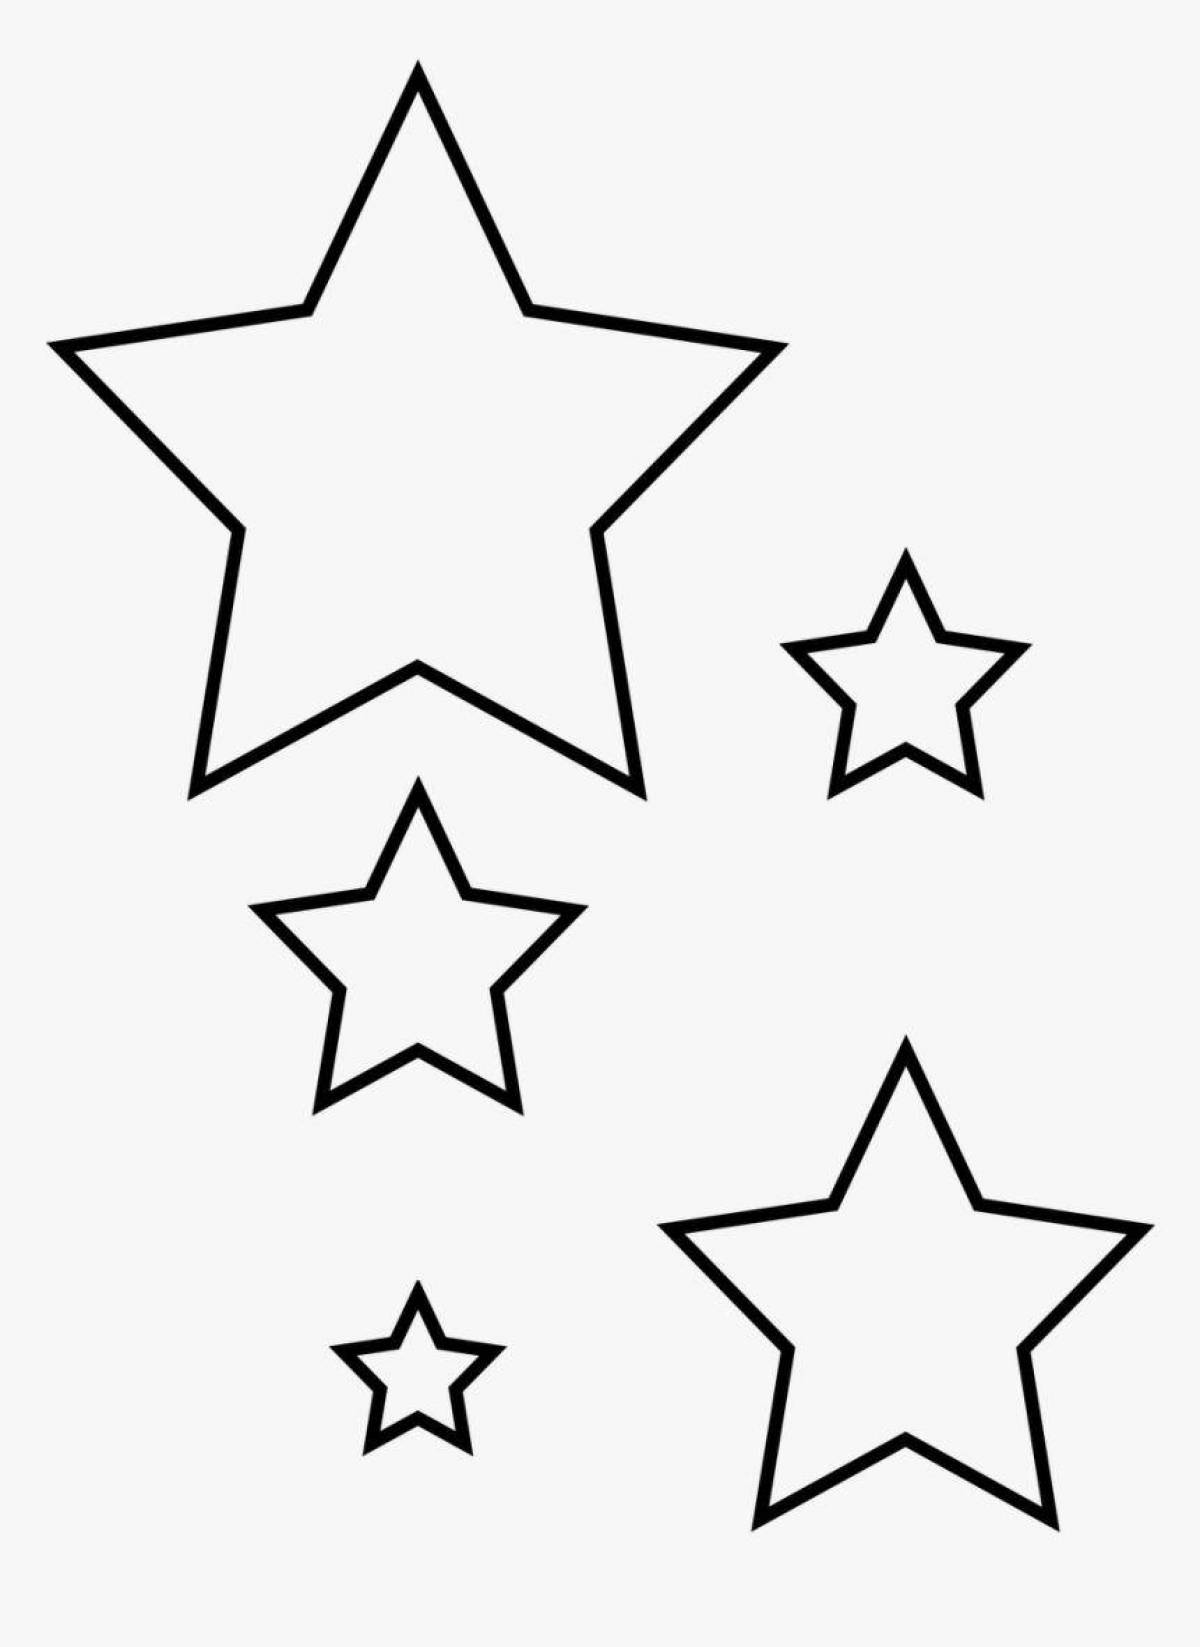 Glowing heart and star coloring page